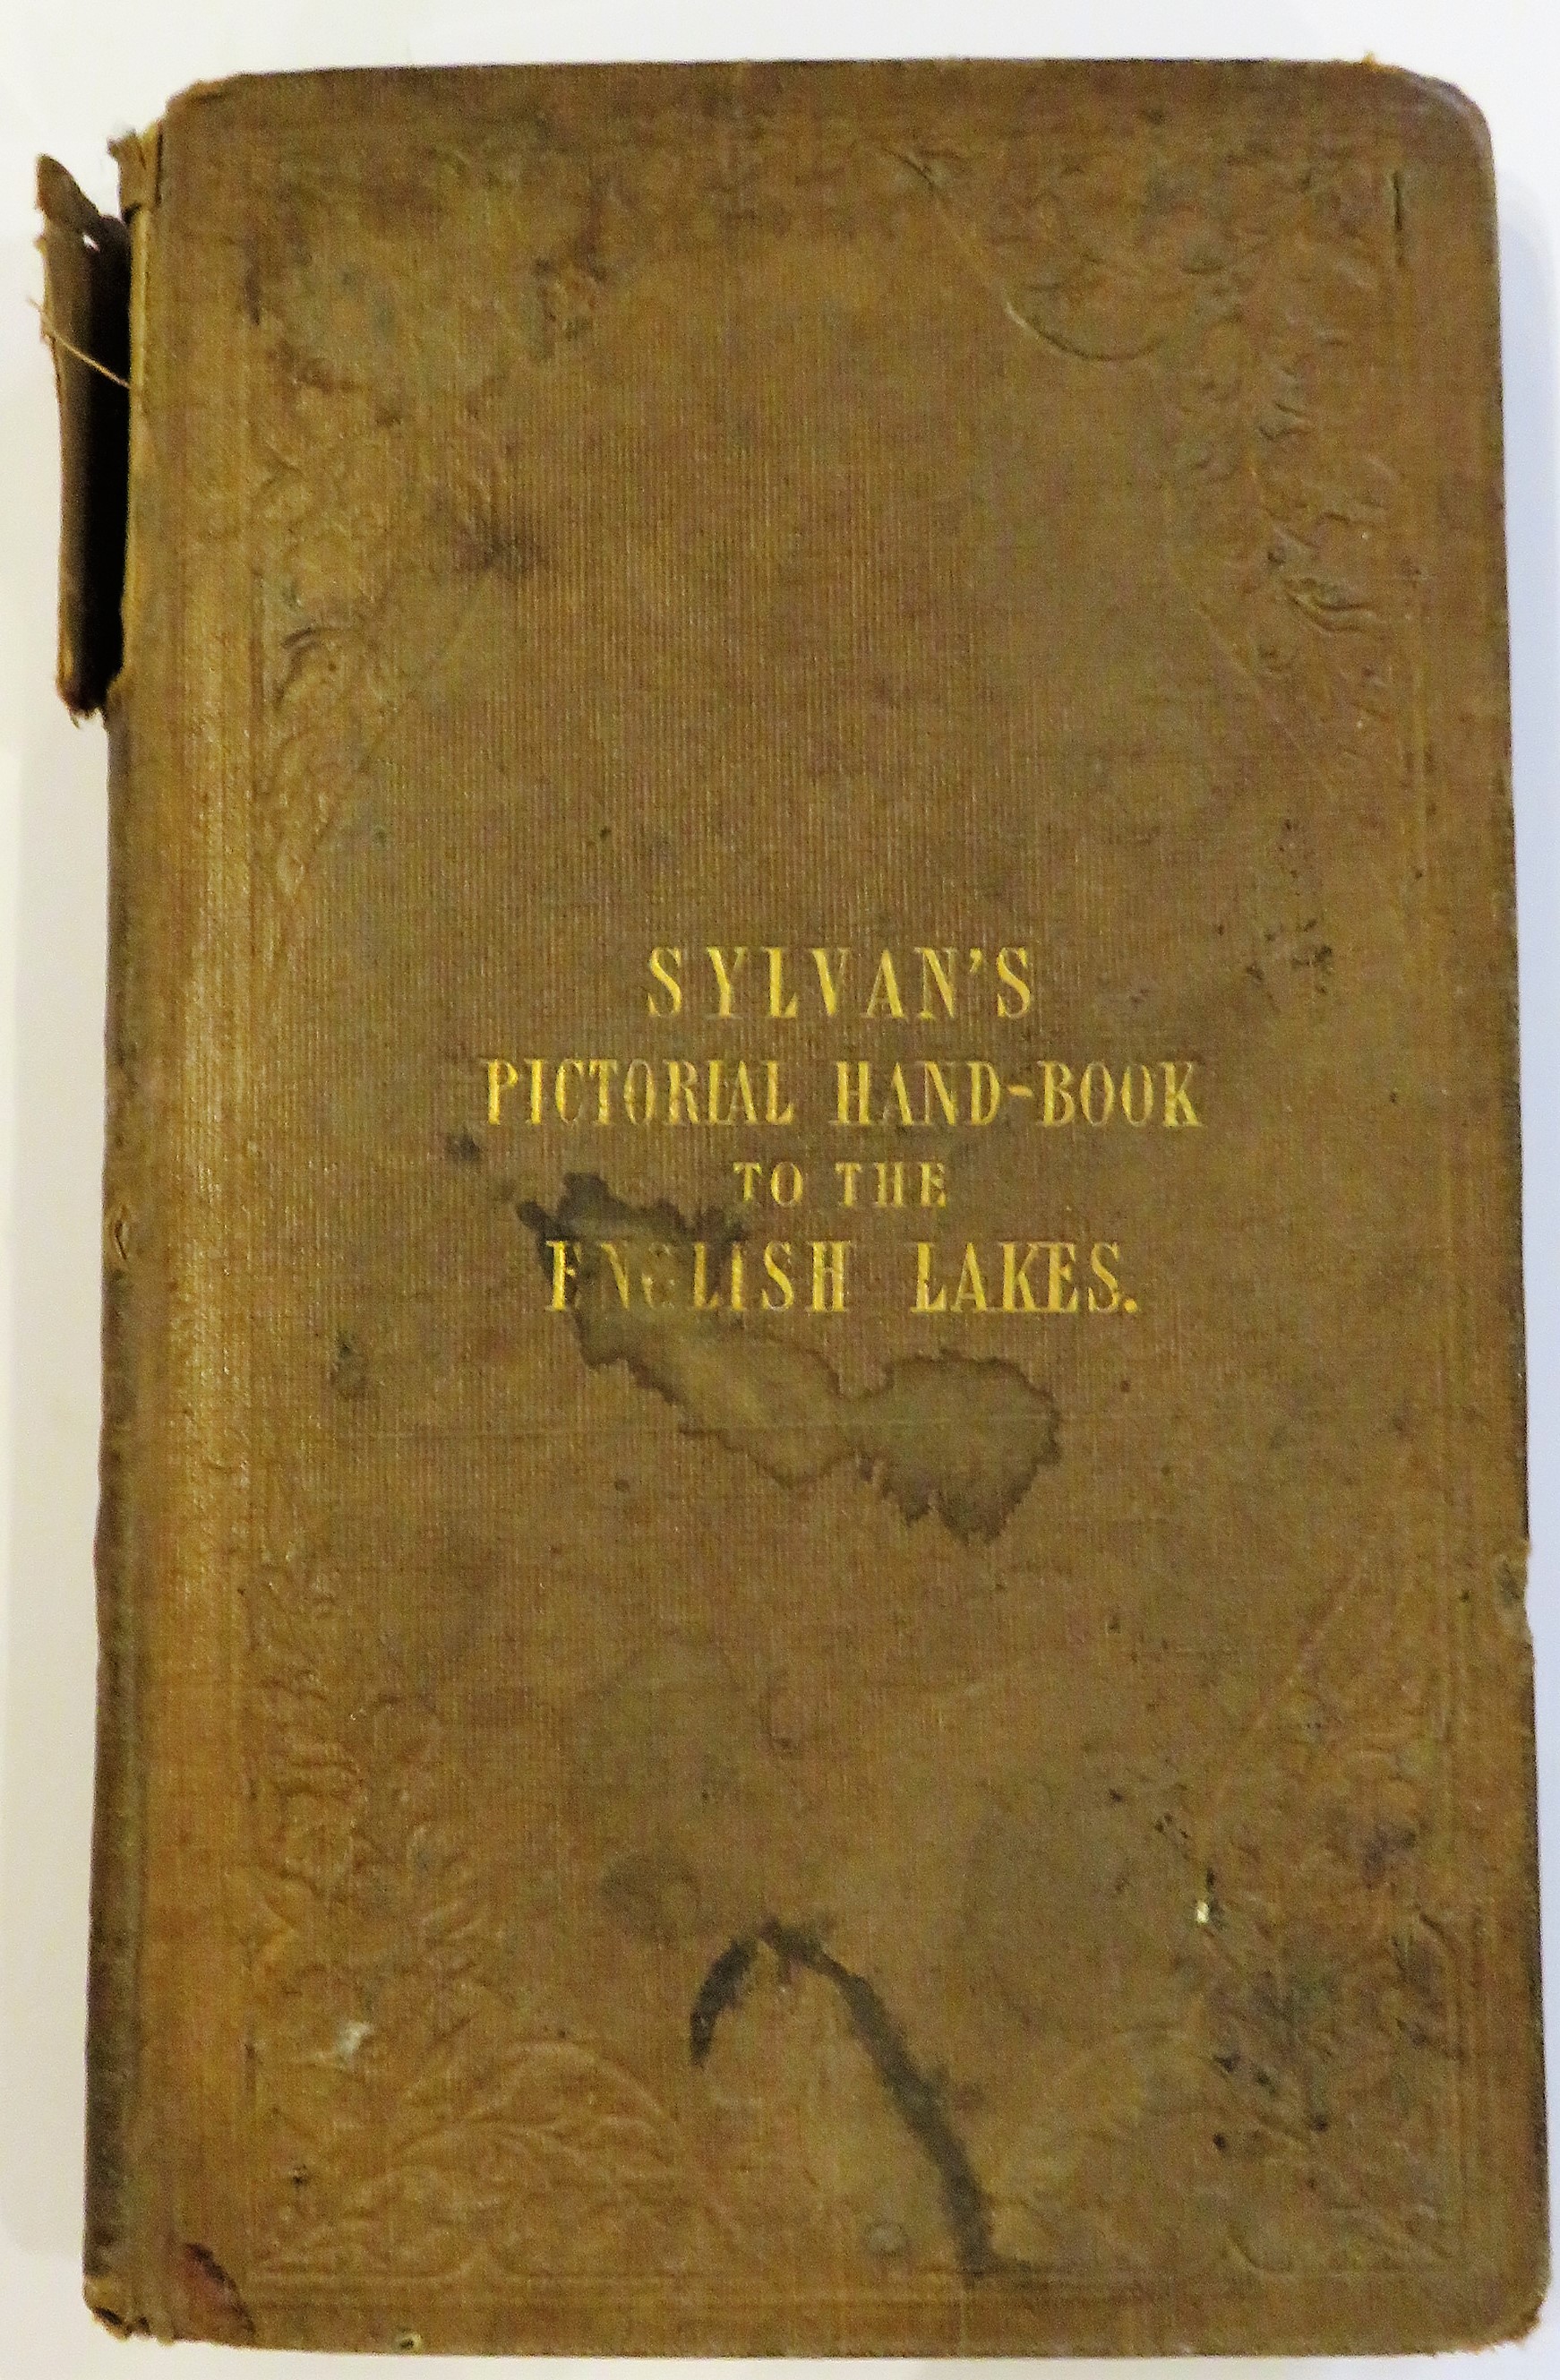 Sylvan's Pictorial Hand-book to the English Lakes